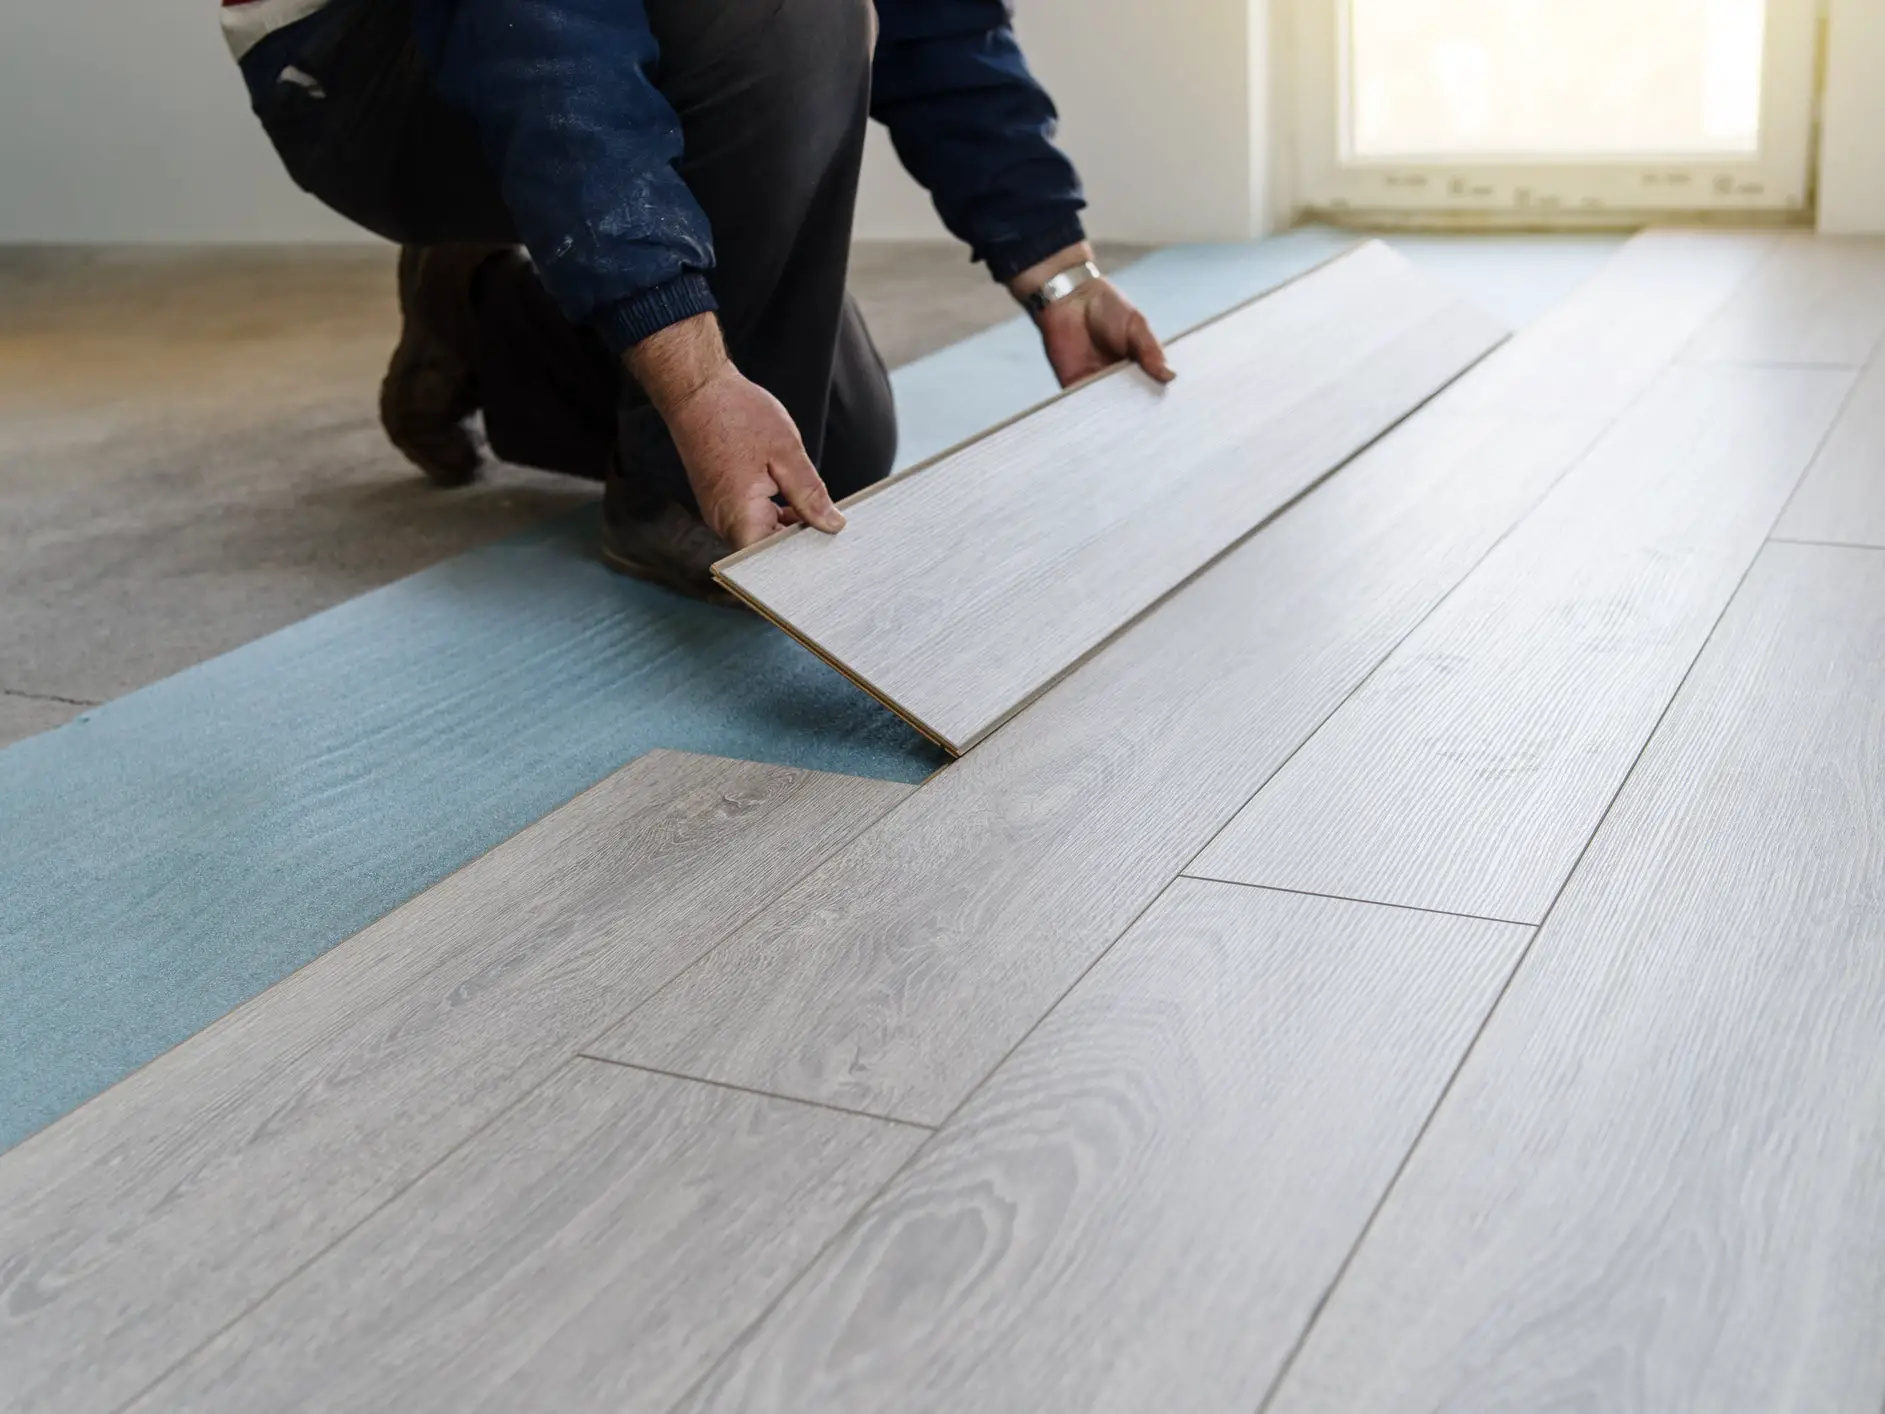 How To Install Temporary Flooring Over, How To Install Carpet On Top Of Laminate Flooring